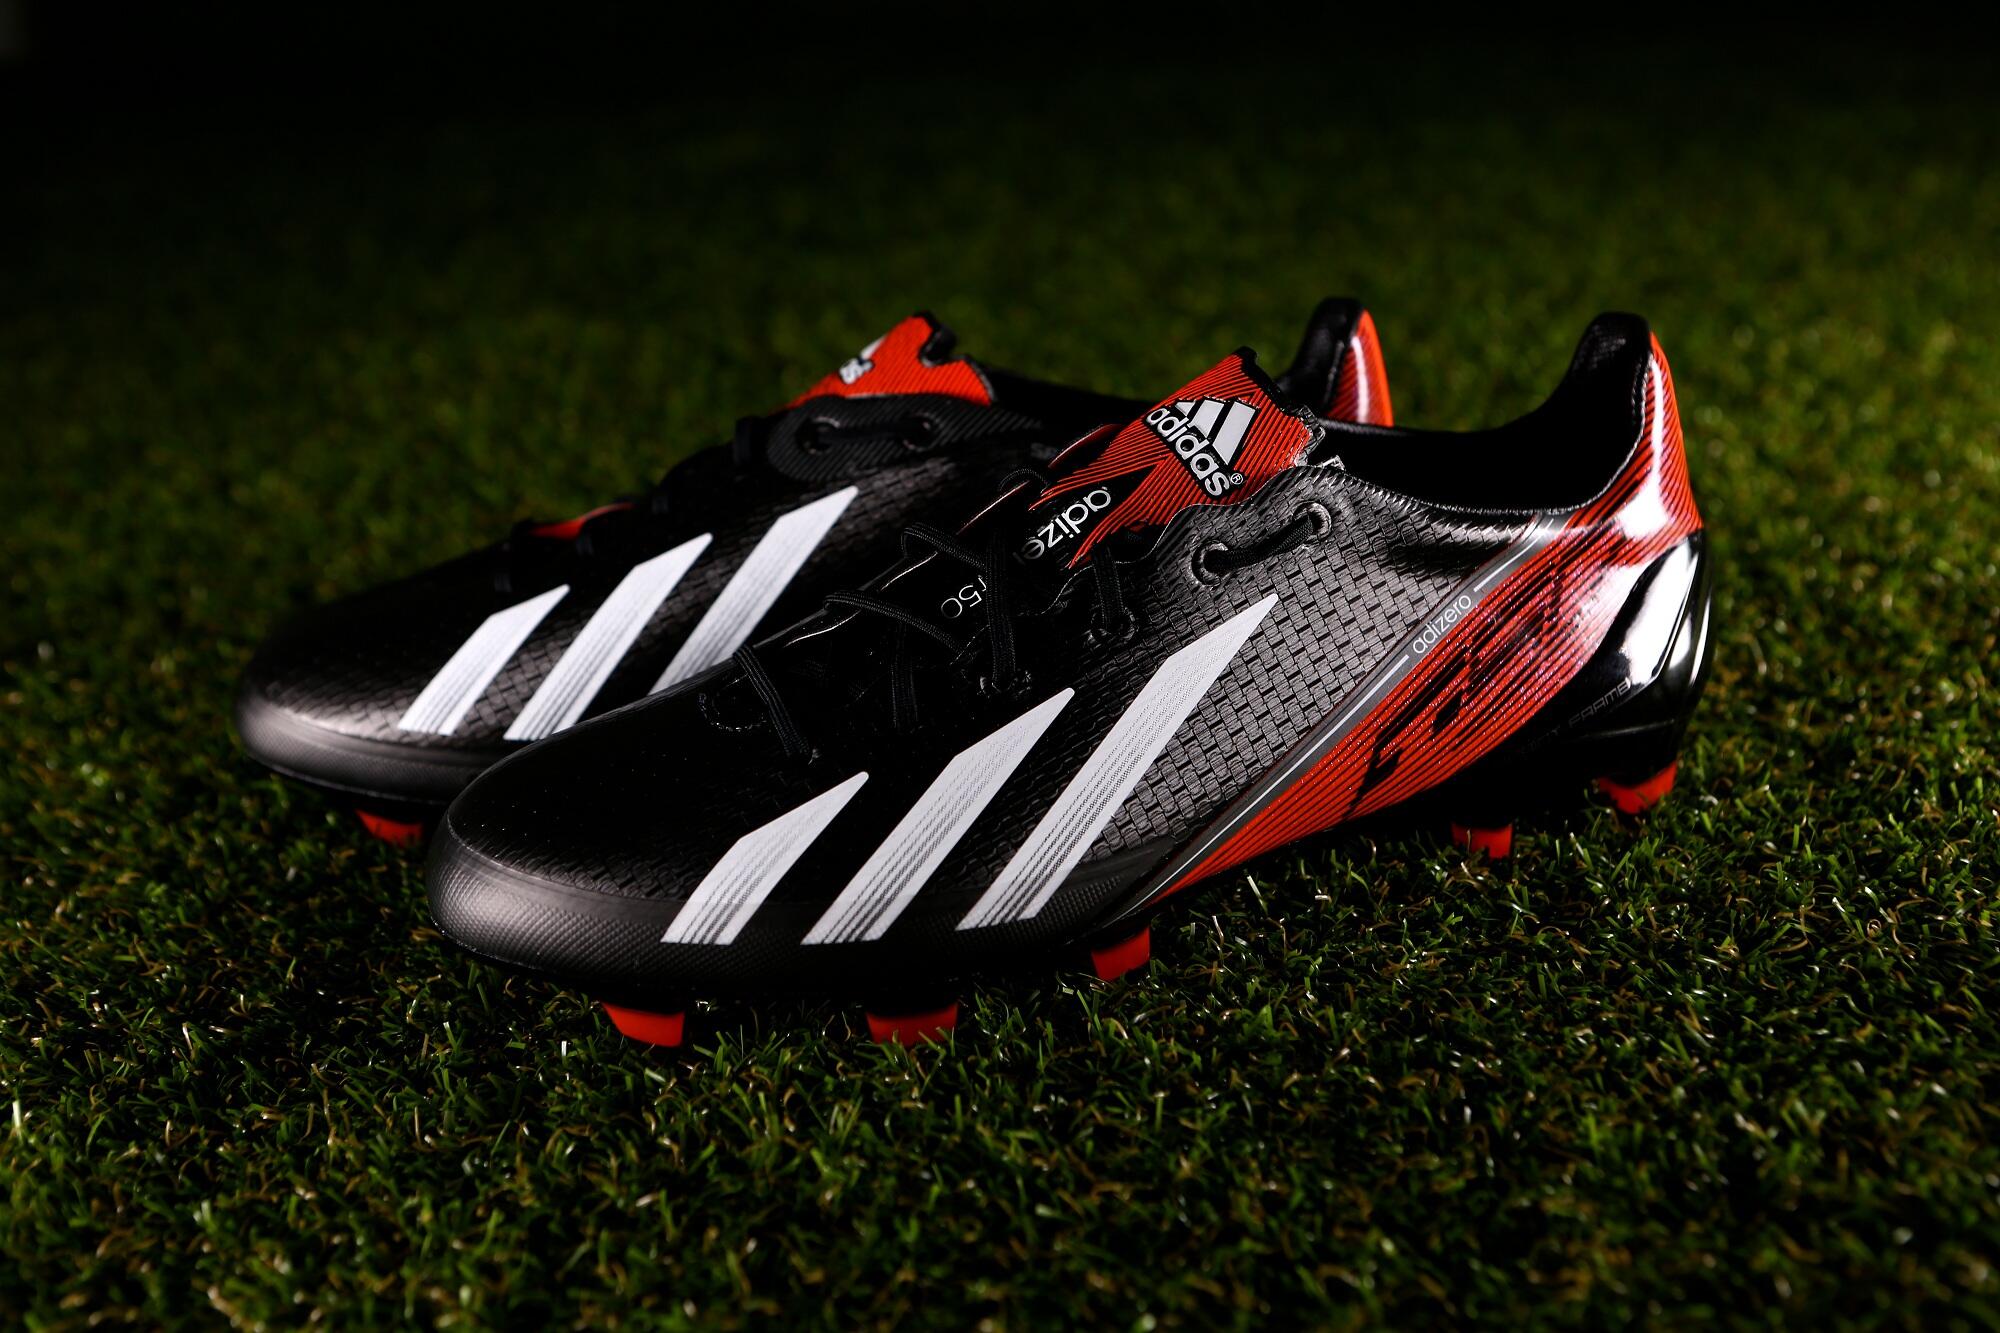 adidas Football on Twitter: "#FindFast in black, the new adizero f50 colourway http://t.co/223b4W6egH" / Twitter